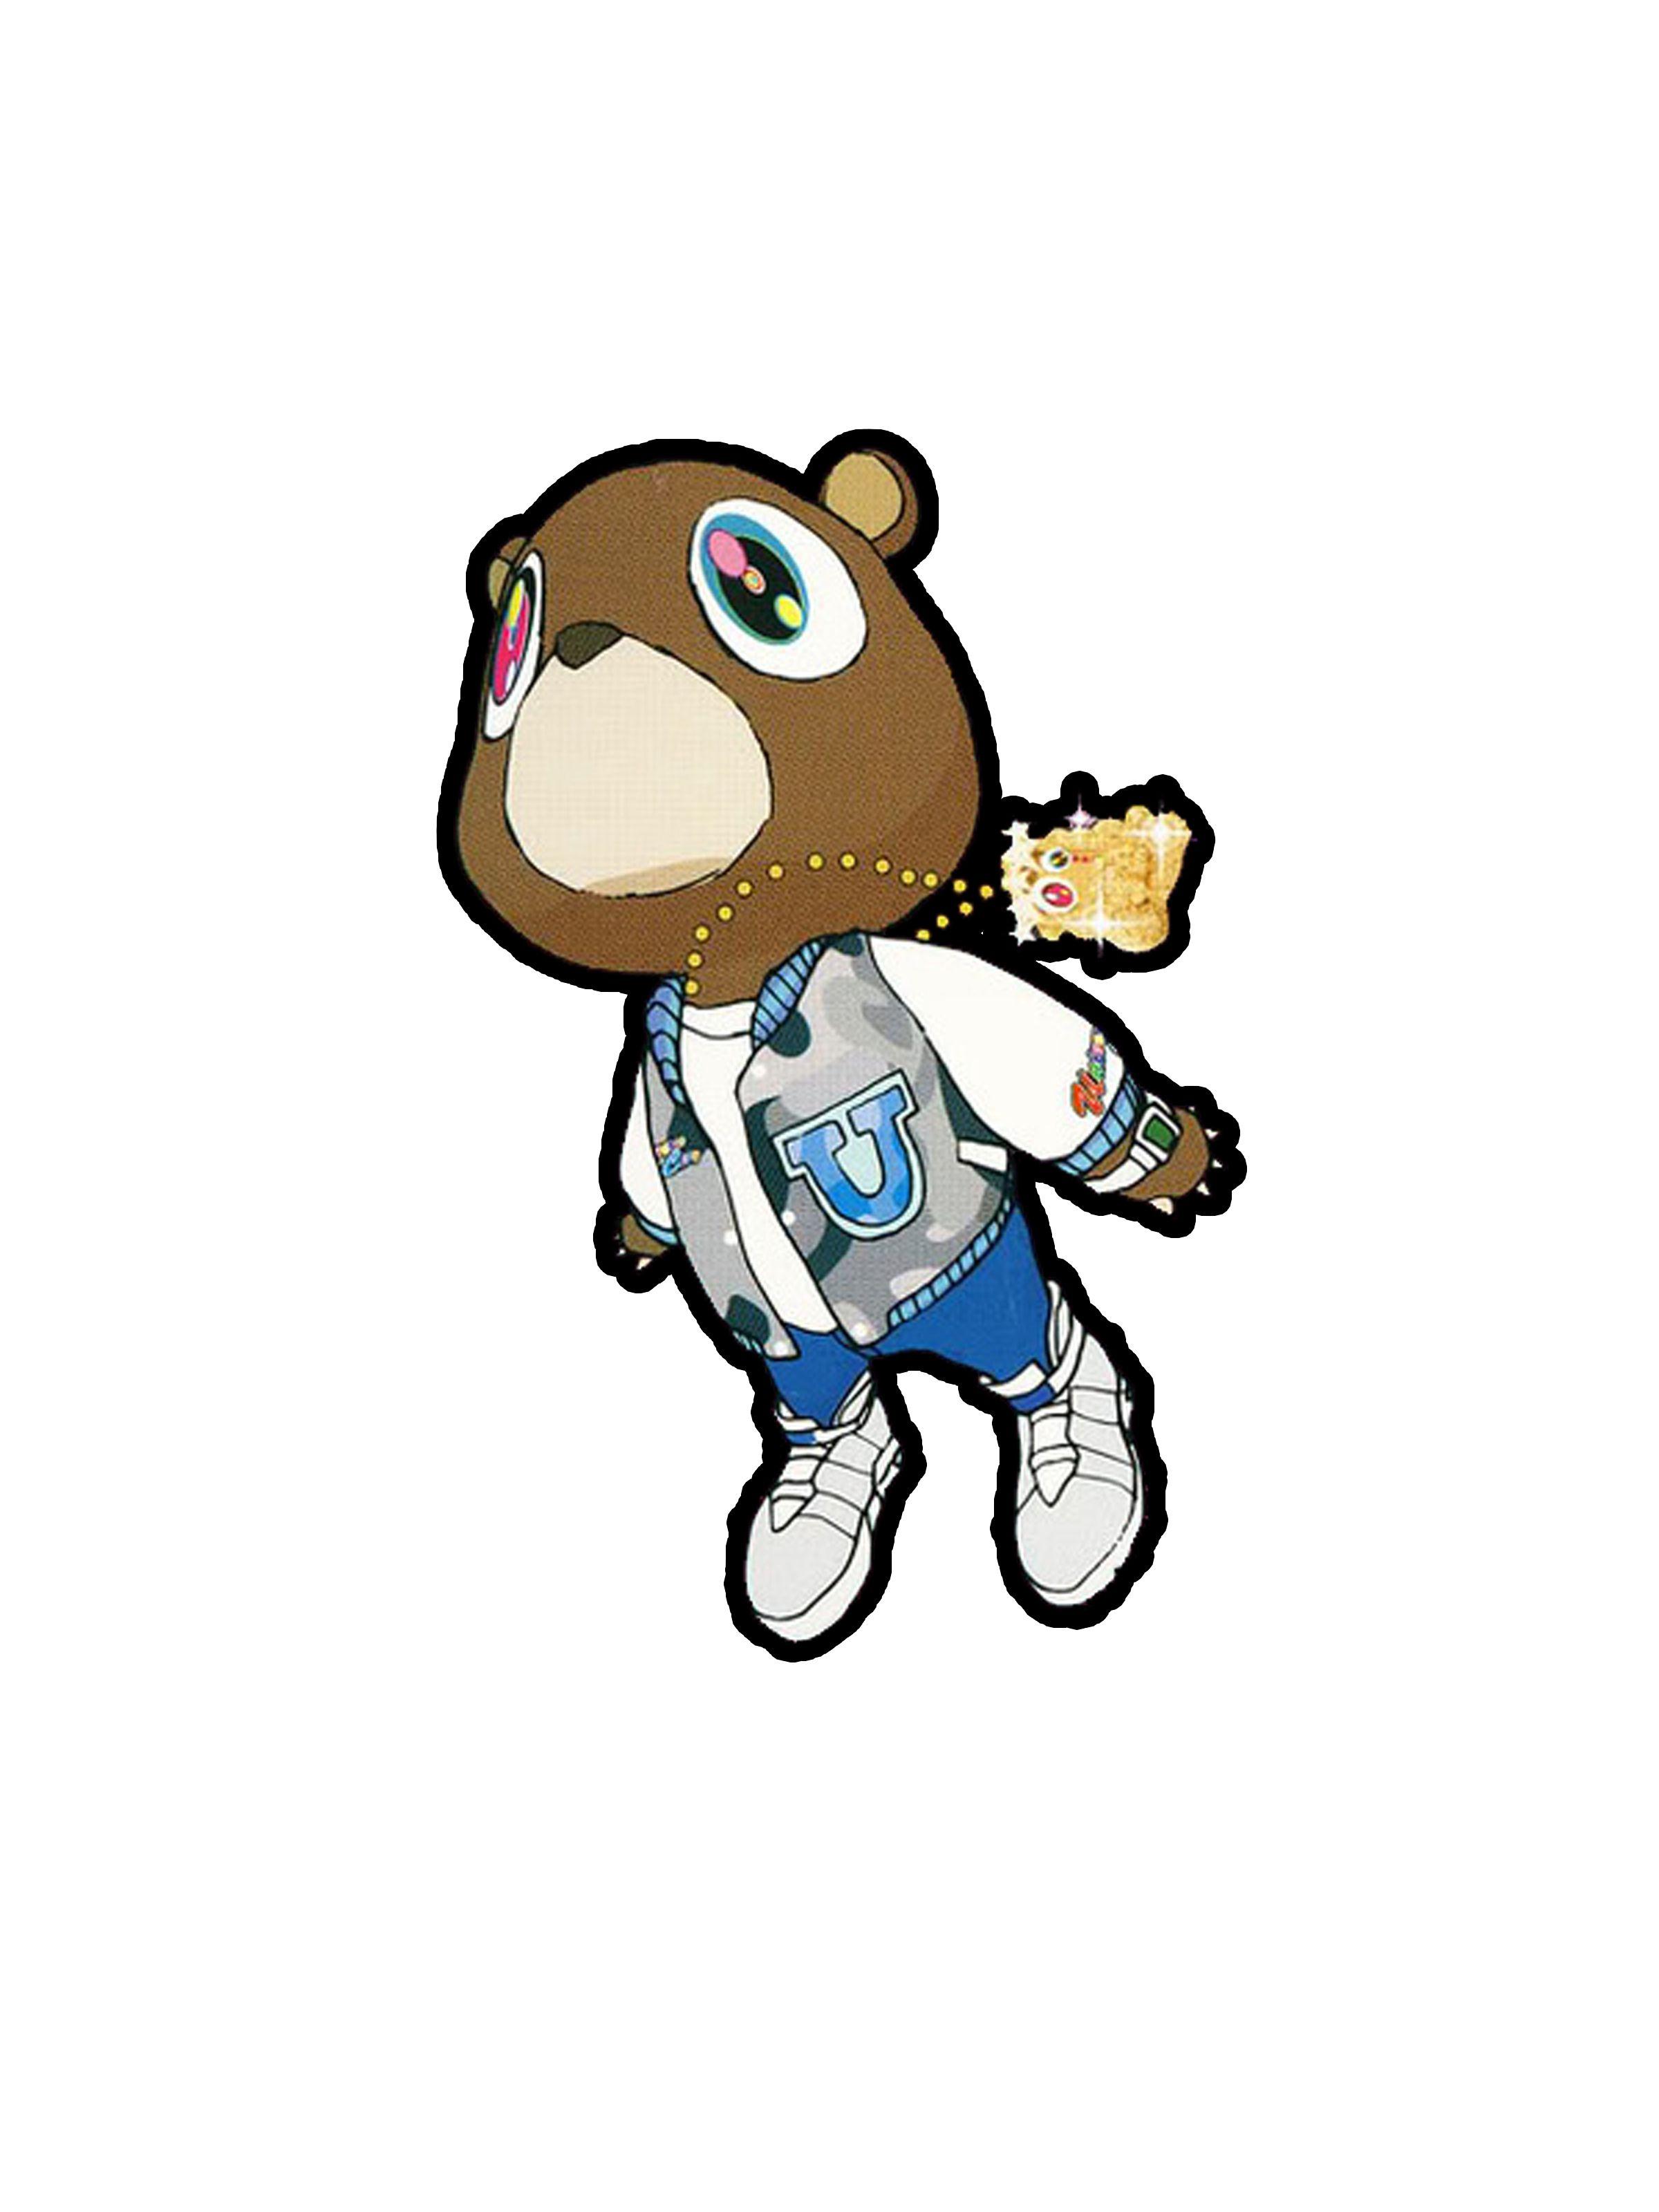 Download Teddy Bear On Gucci And Supreme Wallpaper